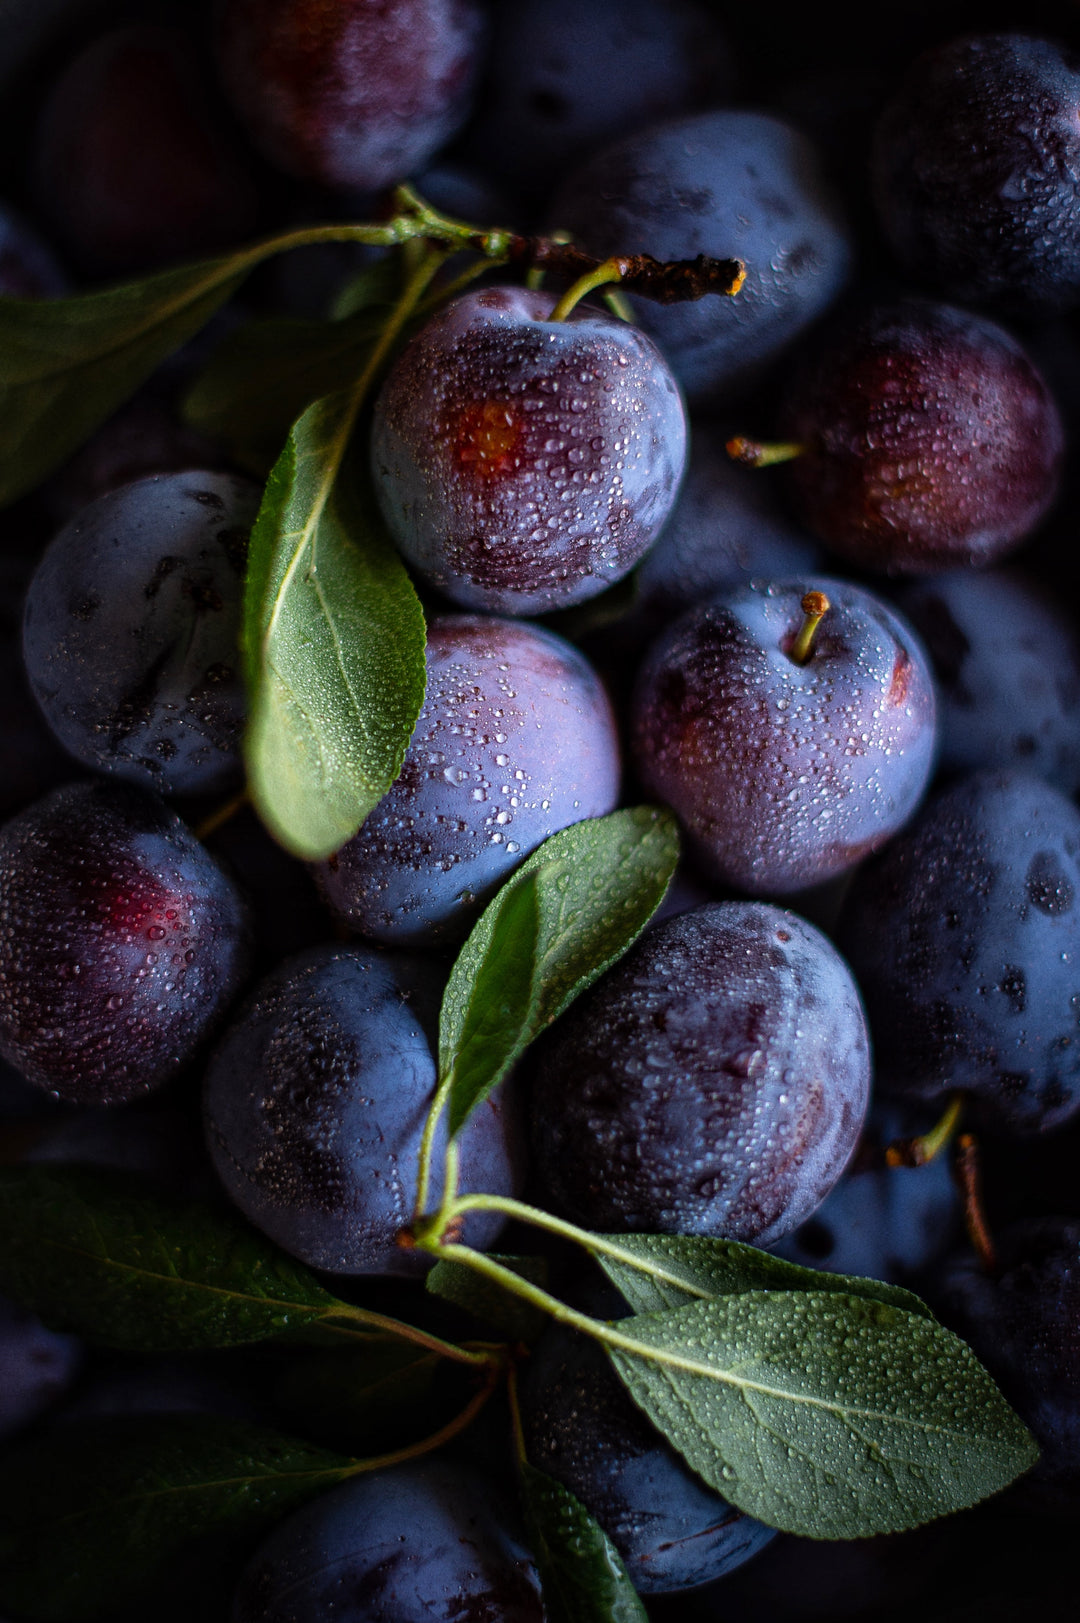 Health benefits and history of plums